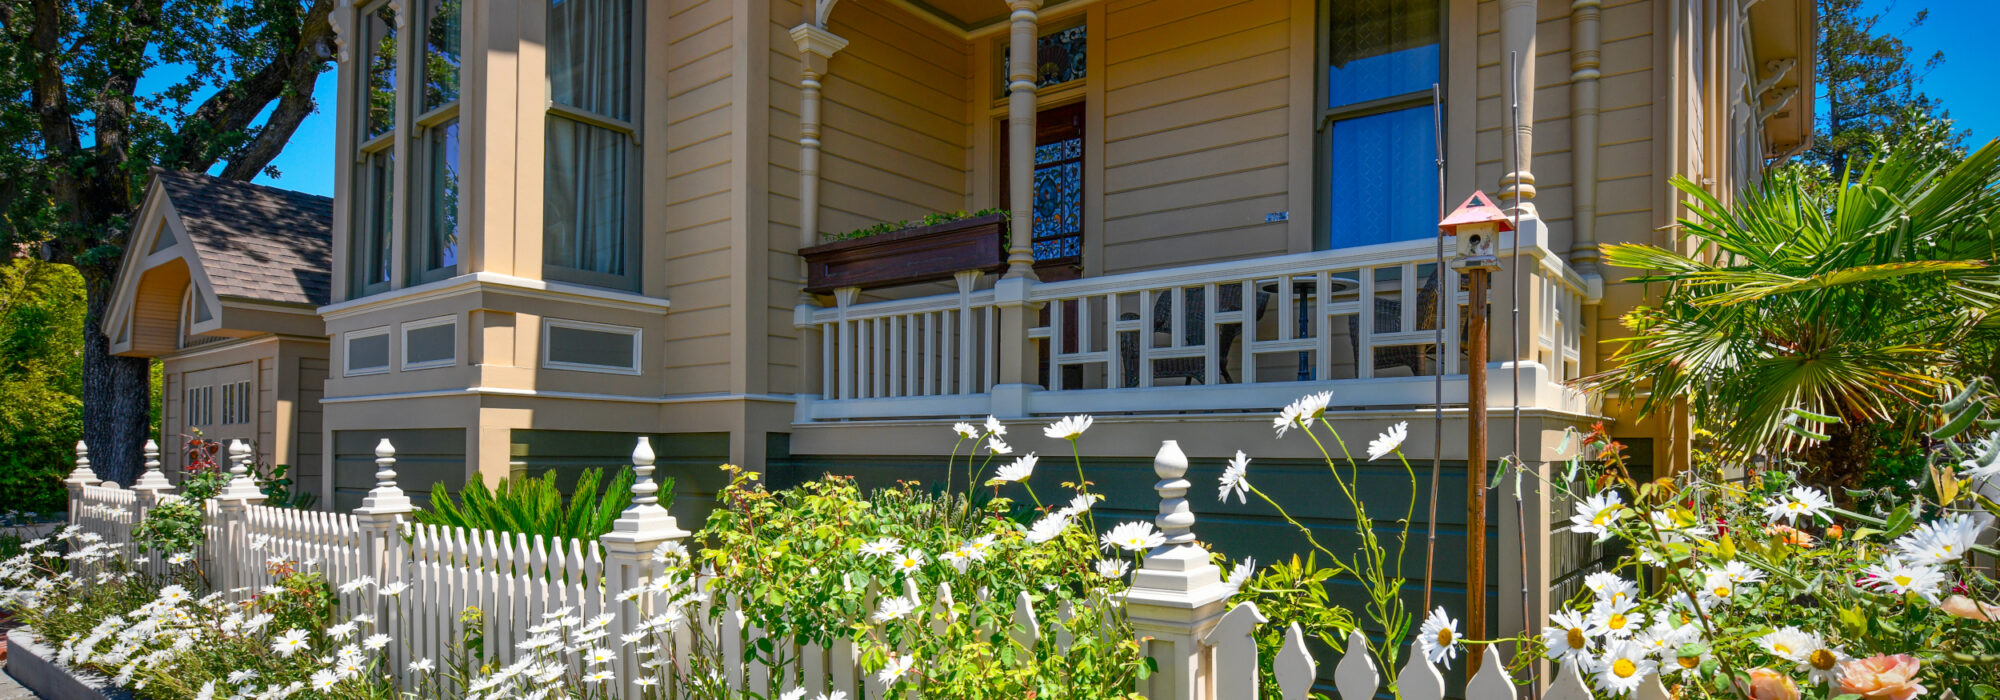 Historic Queen Anne Eastlake Front Porch and Tower Fronting on Jefferson Street. Room 10's Porch/Balcony Sits 5 Feet Above Victorian Garden with Flowers , Palms and Cycads.